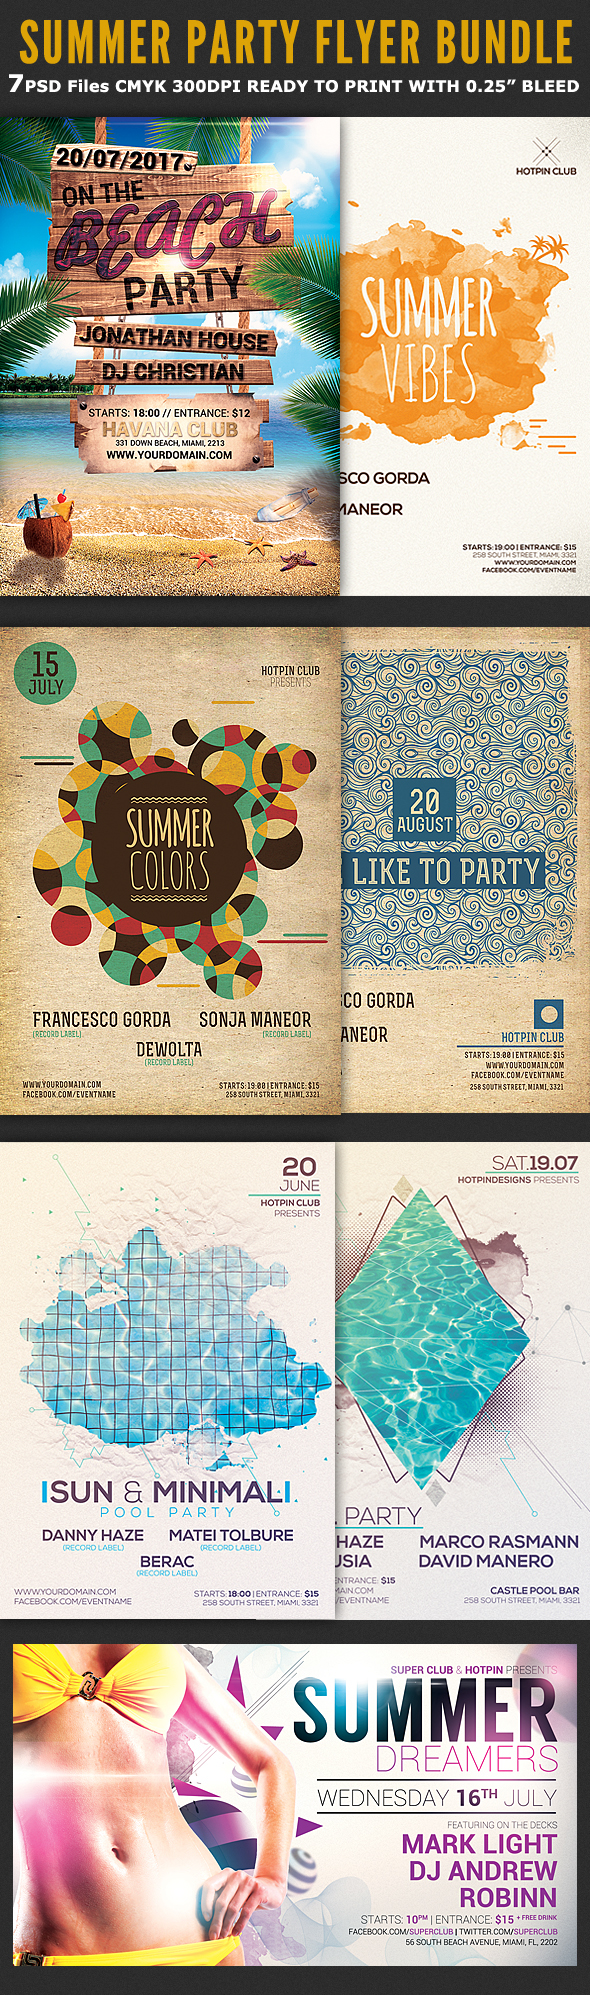 beach party club creative electro flyer design flyers Holiday House music Invitation